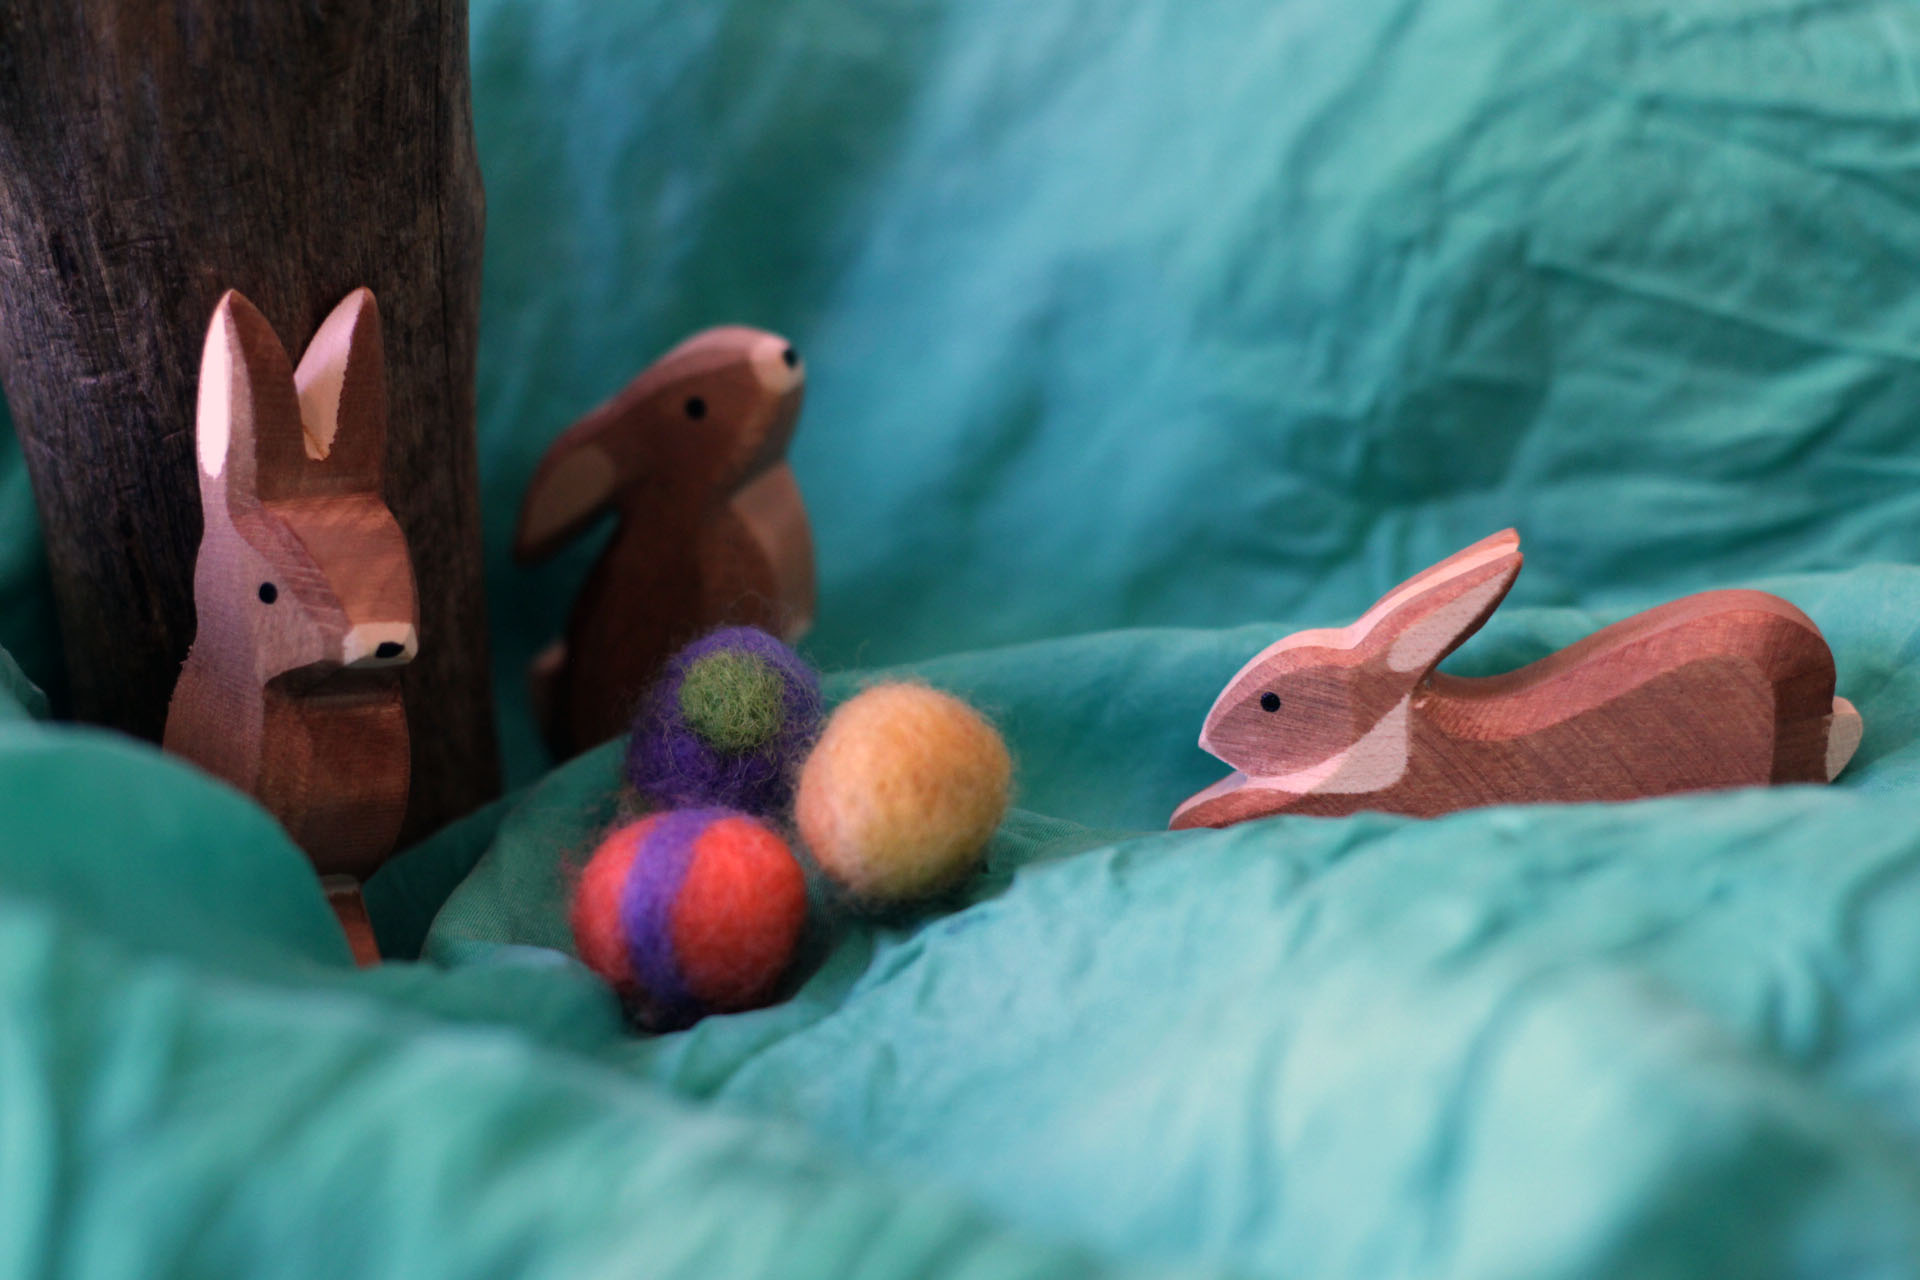 easter rabbits